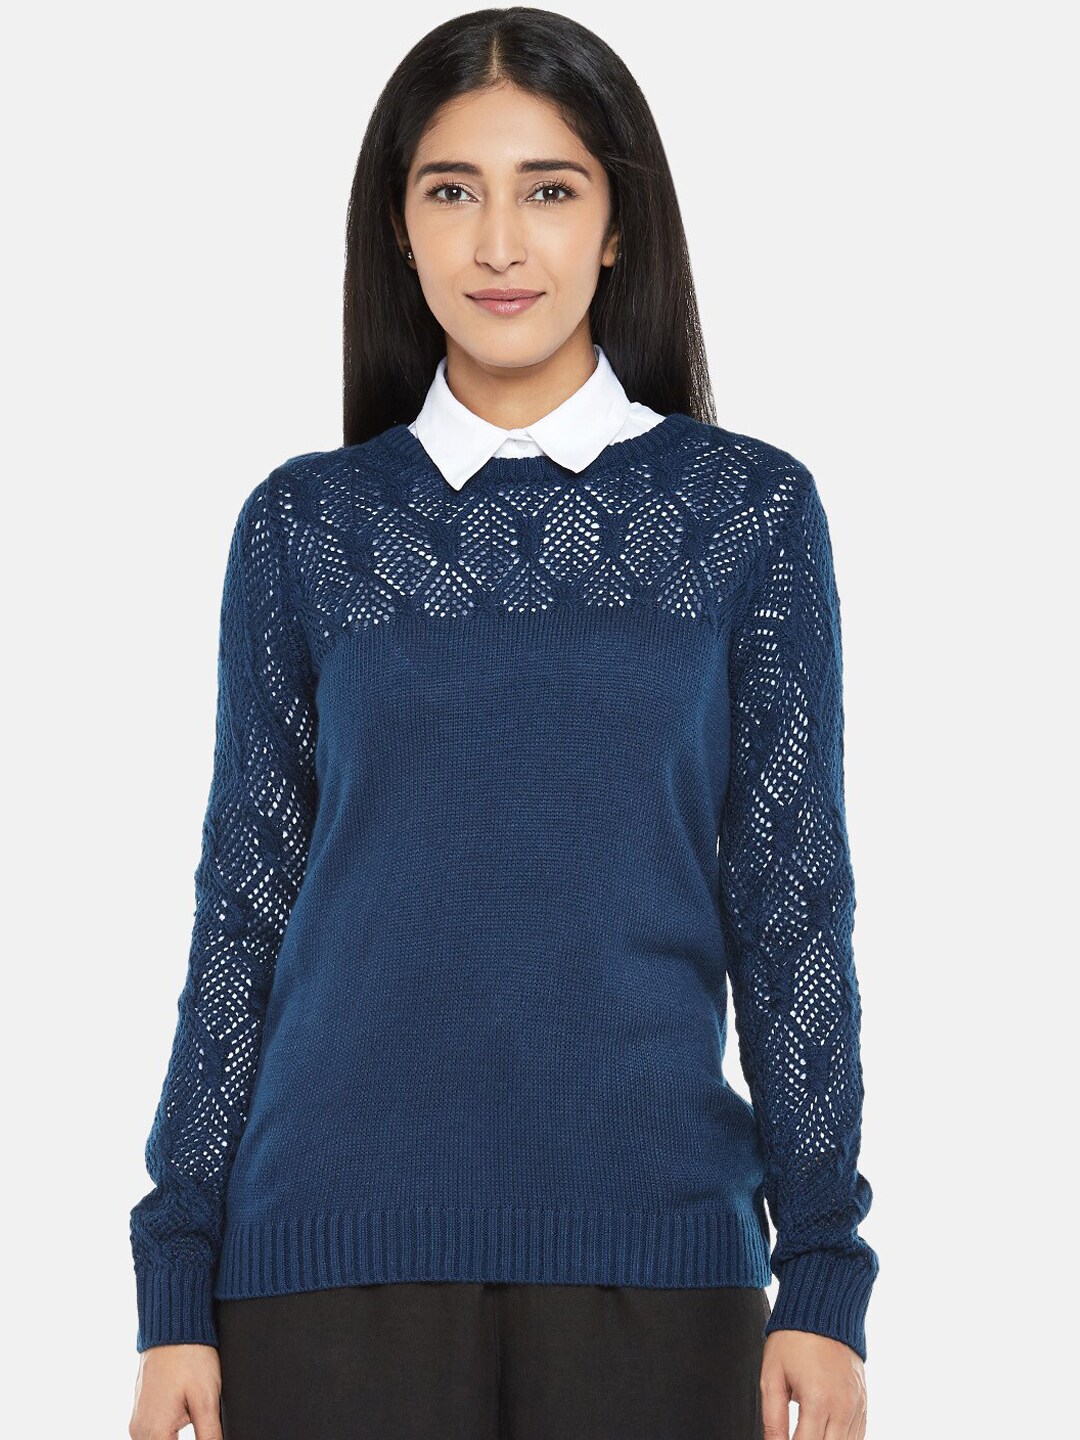 Annabelle by Pantaloons Women Blue Solid Pullover Sweater Price in India